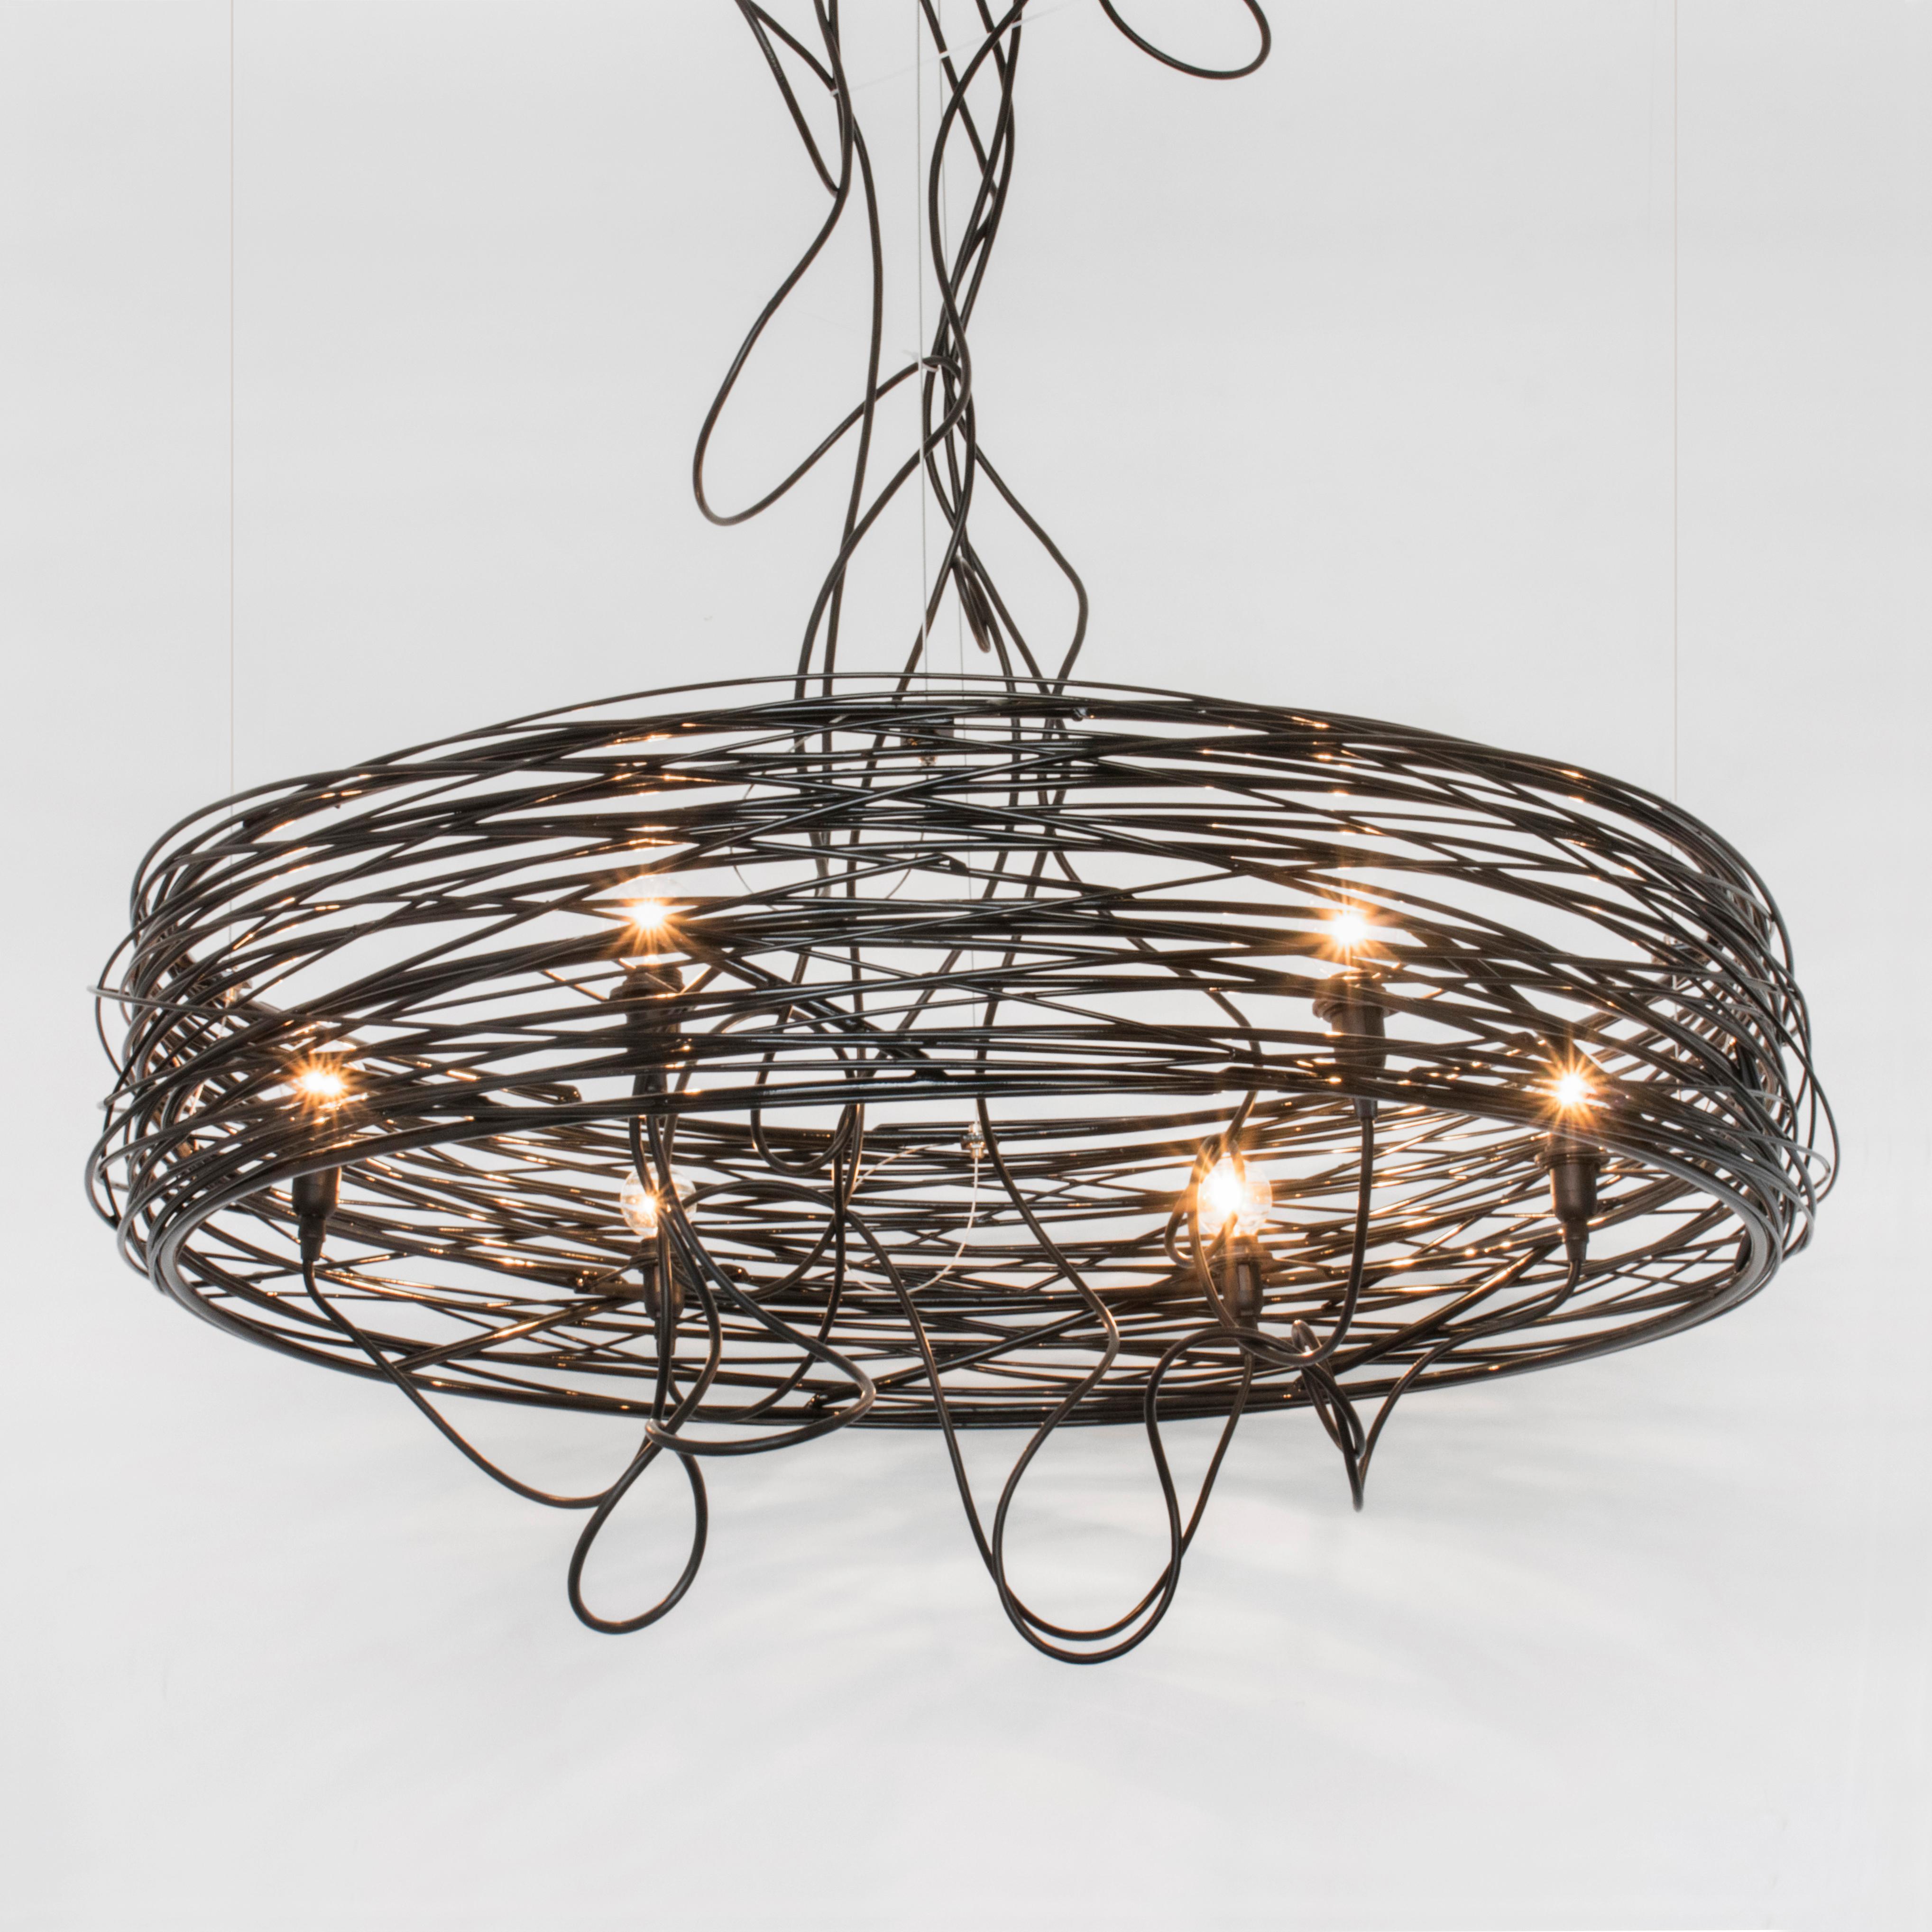 The SPIRAL NEST chandelier is composed of hand-rolled steel rods in various thicknesses, skillfully welded together. Inspired by a sketch in the artist's notebook, each Nest is slightly different, and although similar no two are identical. This